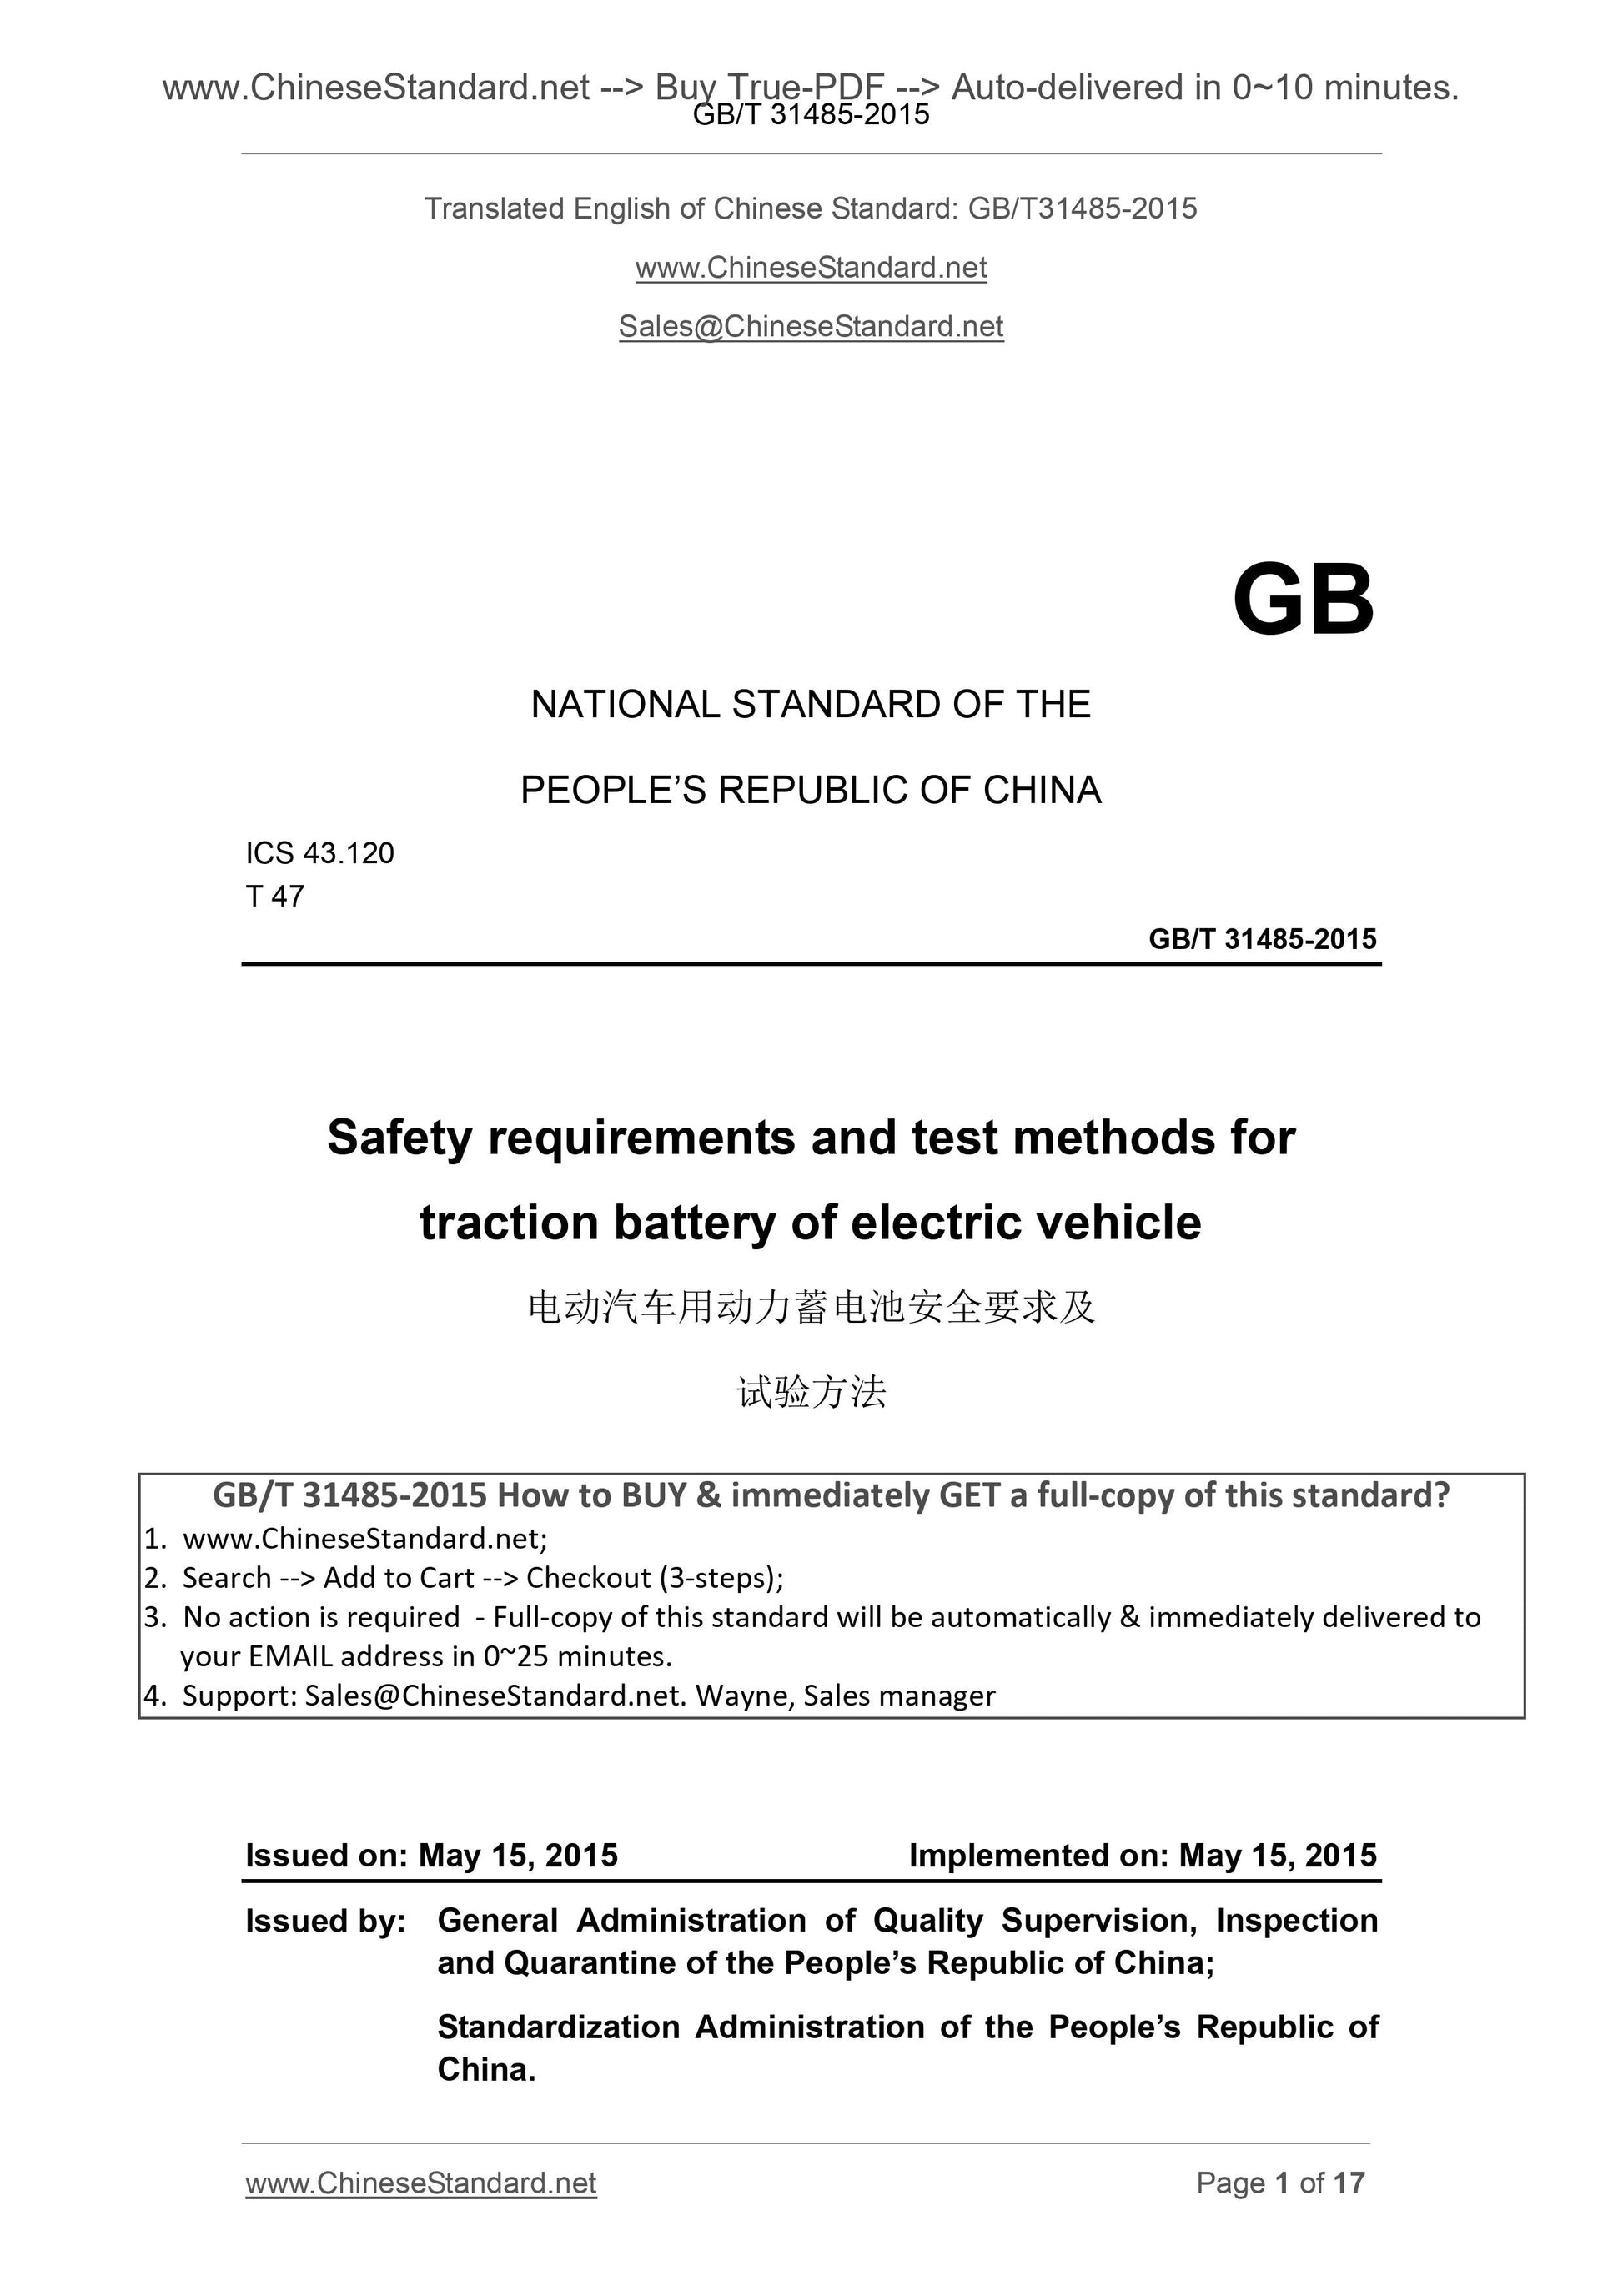 GB/T 31485-2015 Page 1